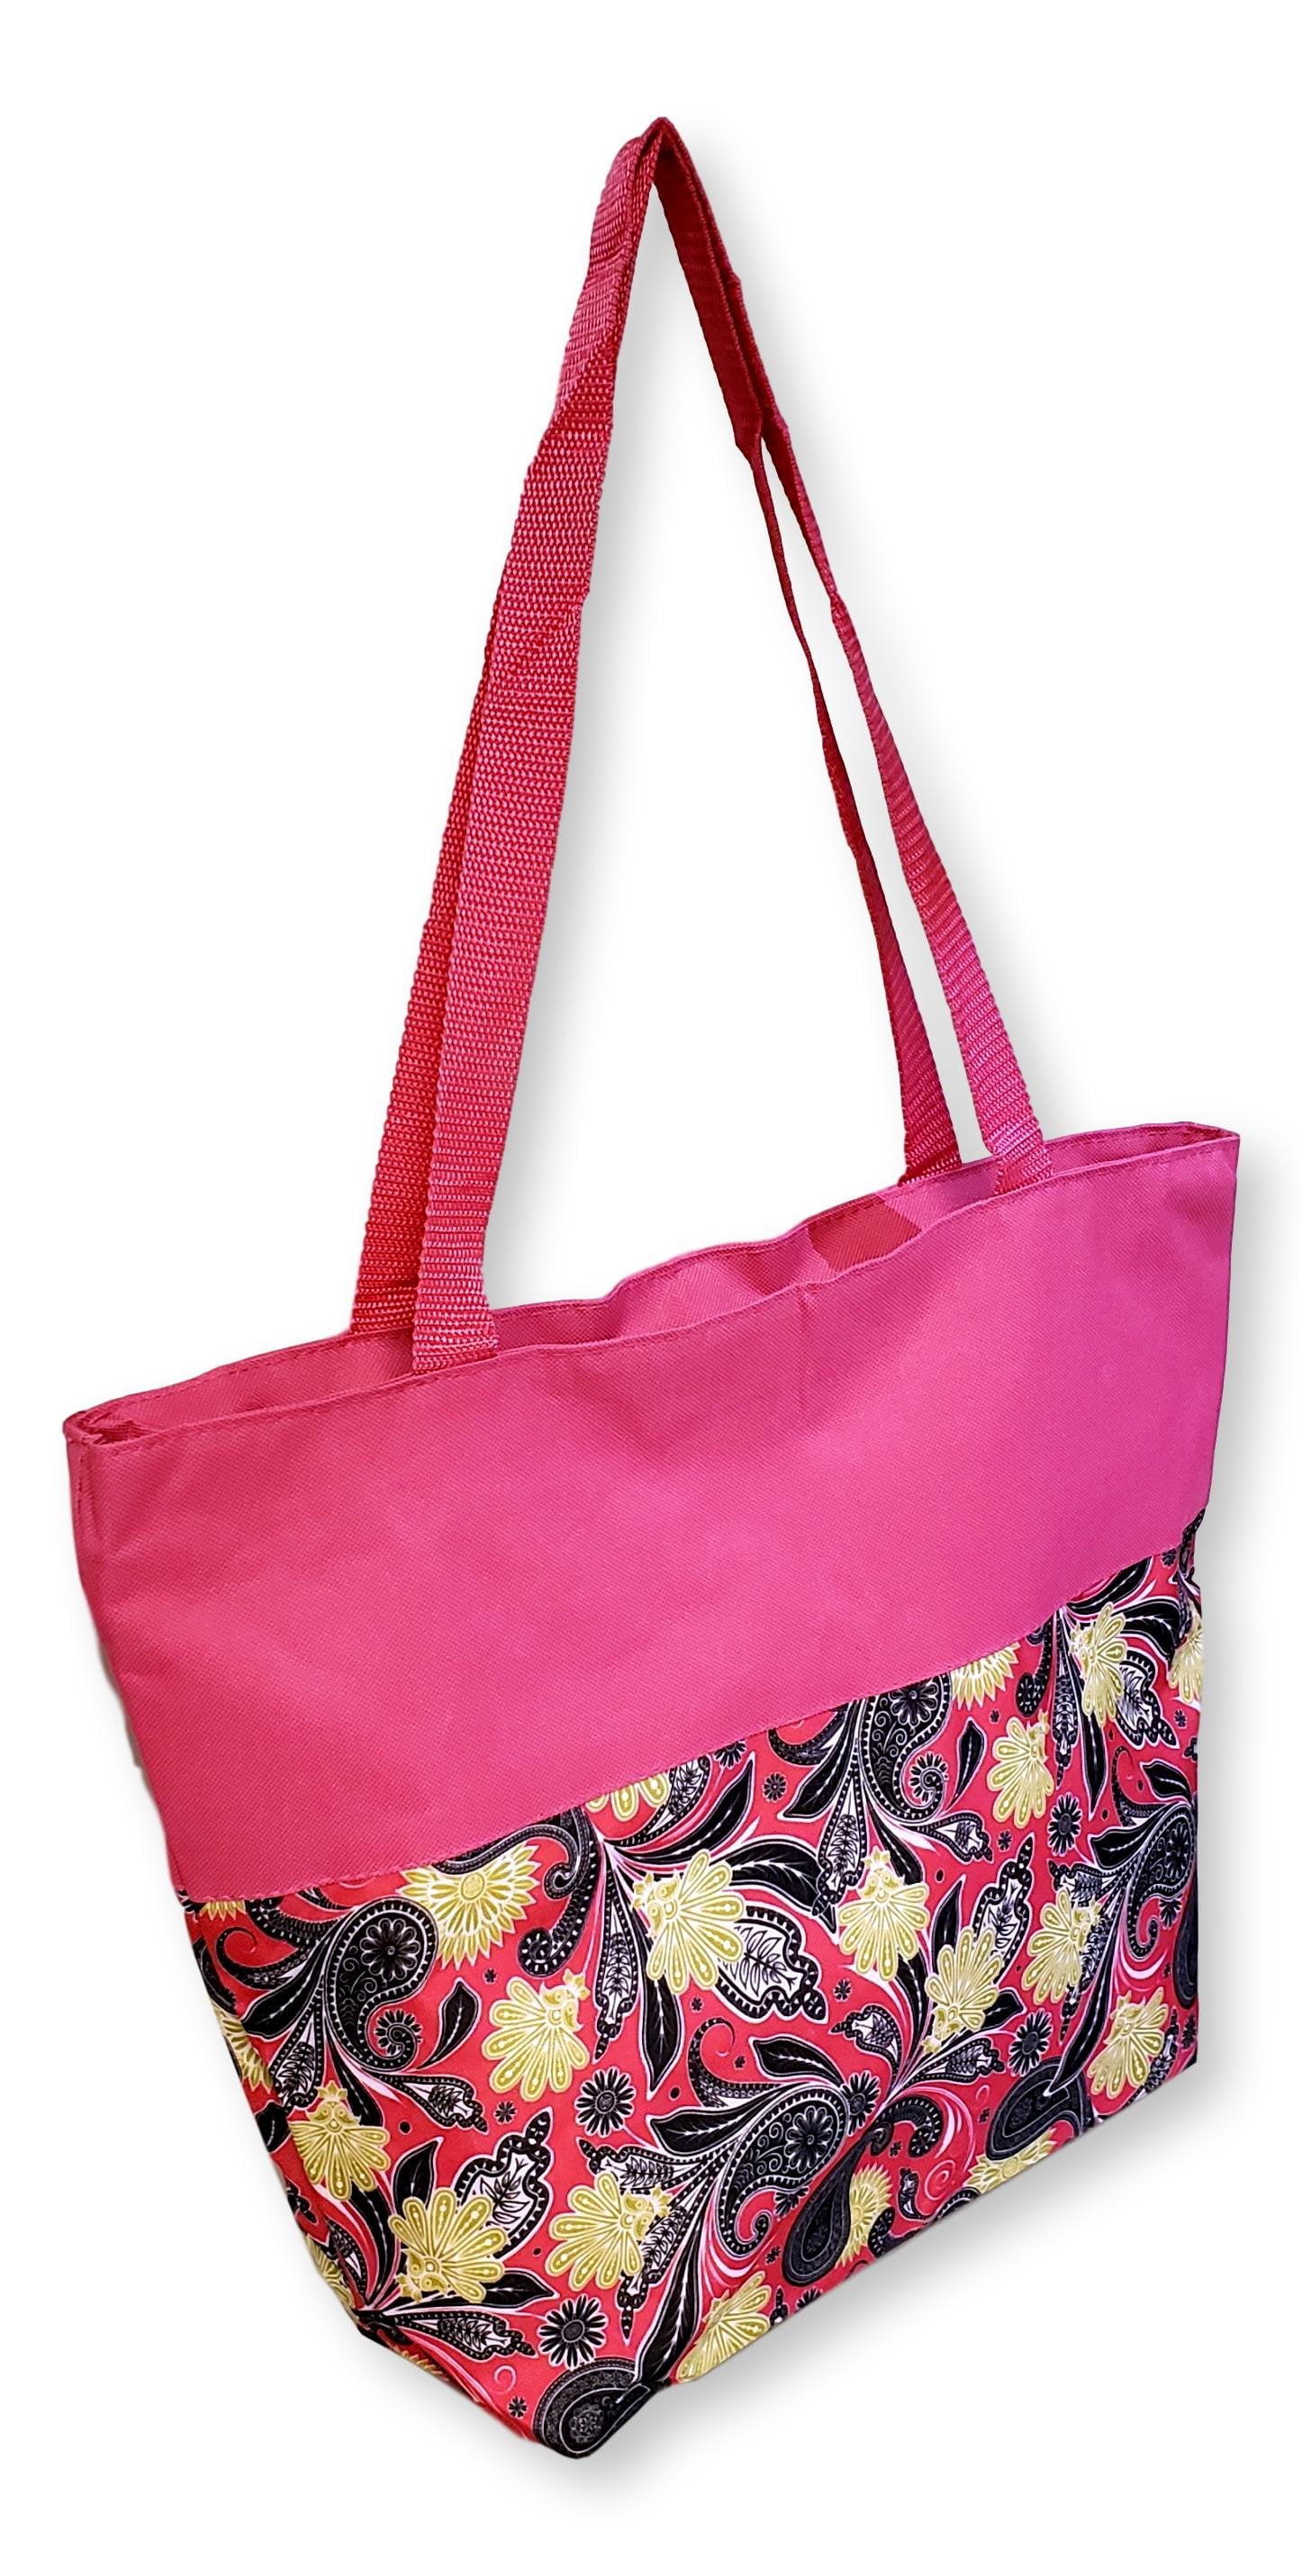 Personalized Tote Bags | Custom Tote Bags Personal or Business